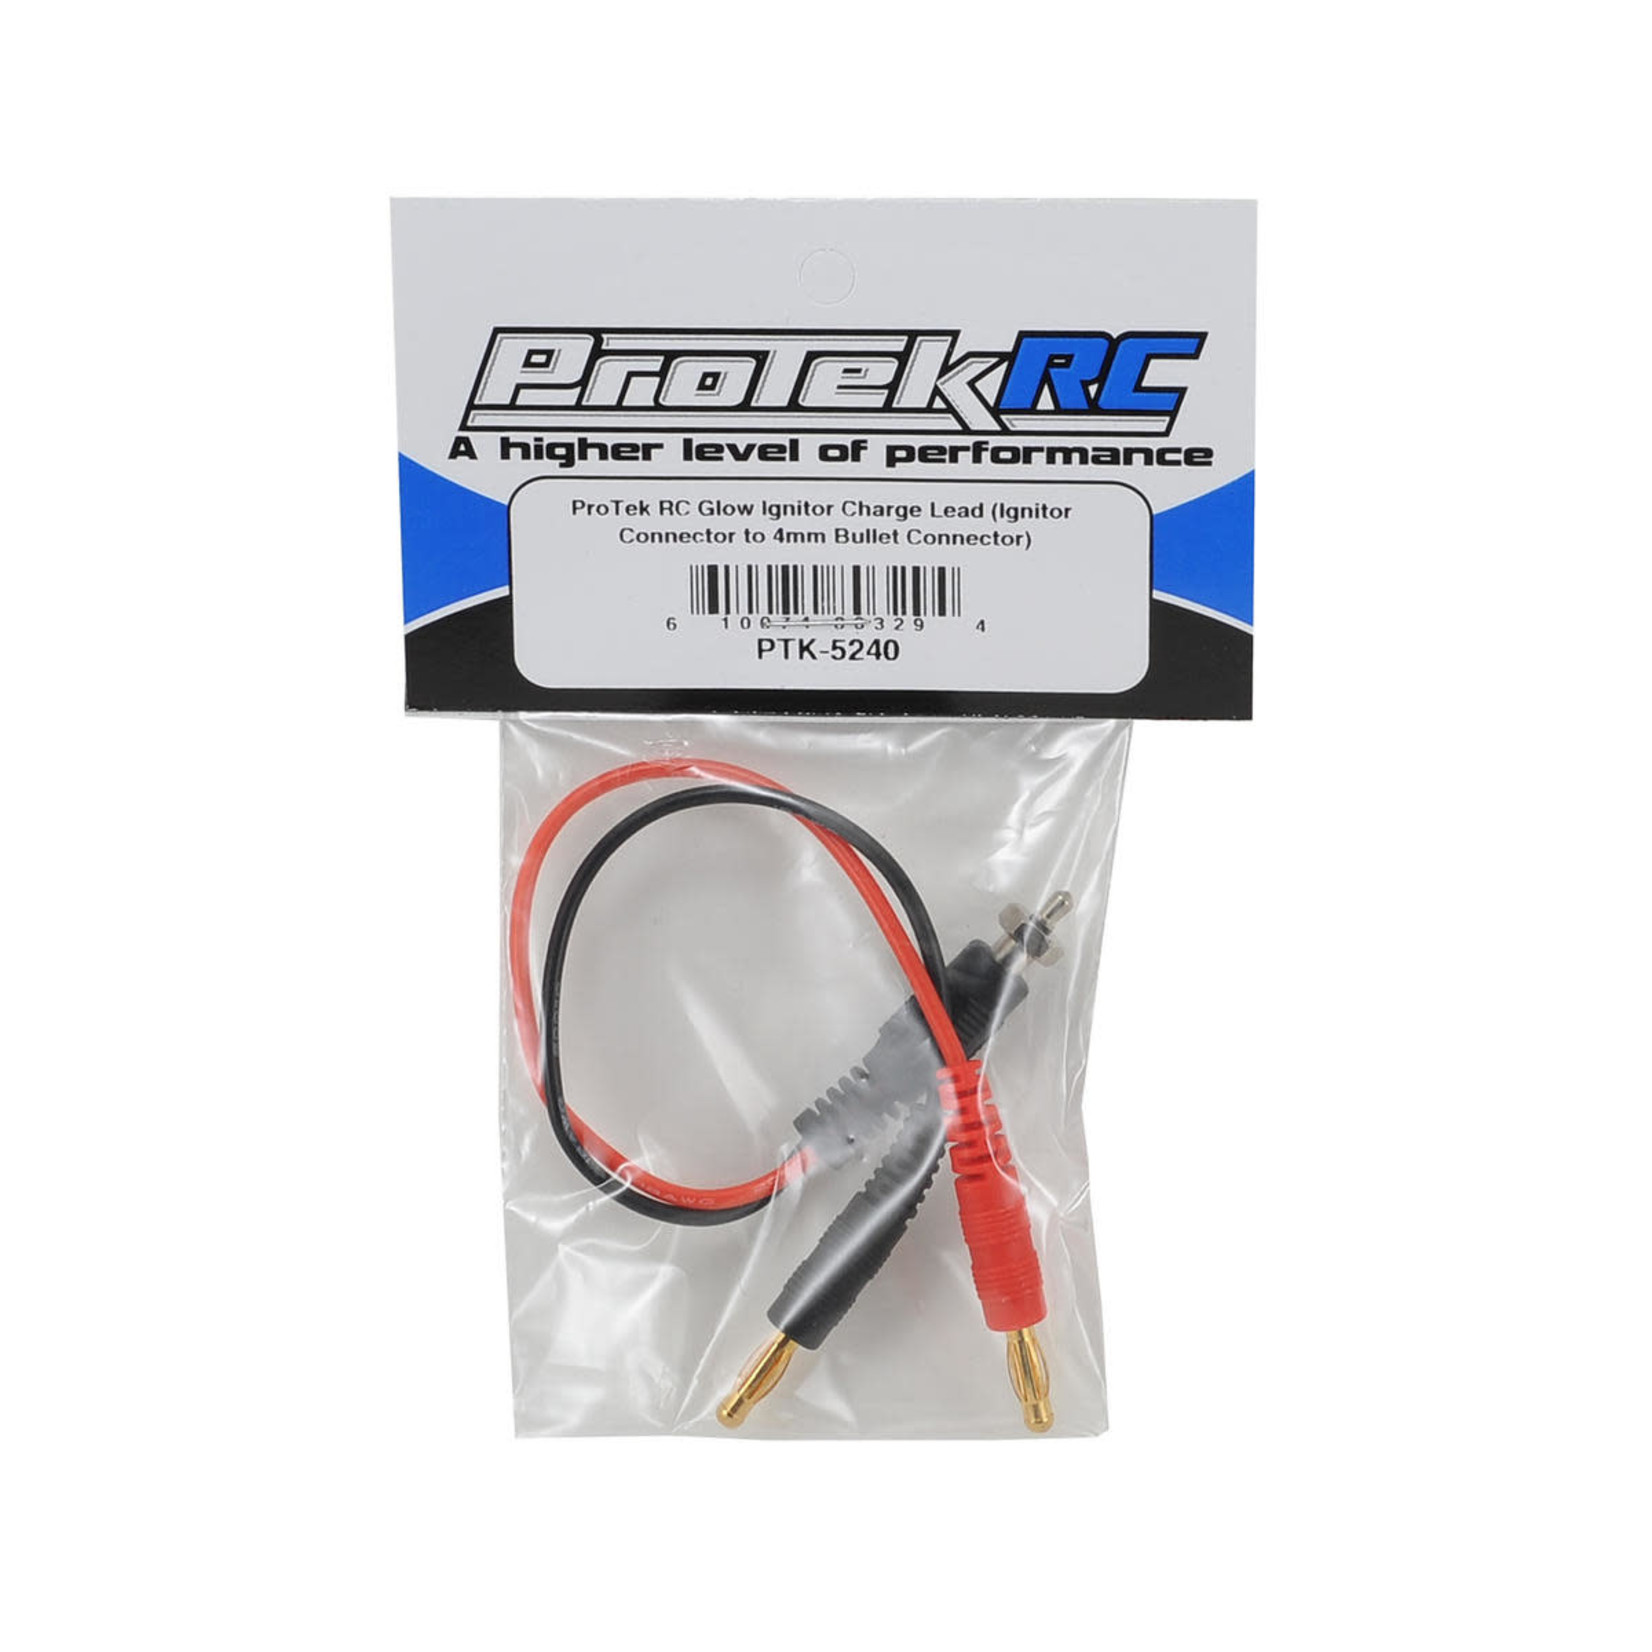 ProTek RC ProTek RC Glow Ignitor Charge Lead (Ignitor Connector to 4mm Bullet Connector) #PTK-5240